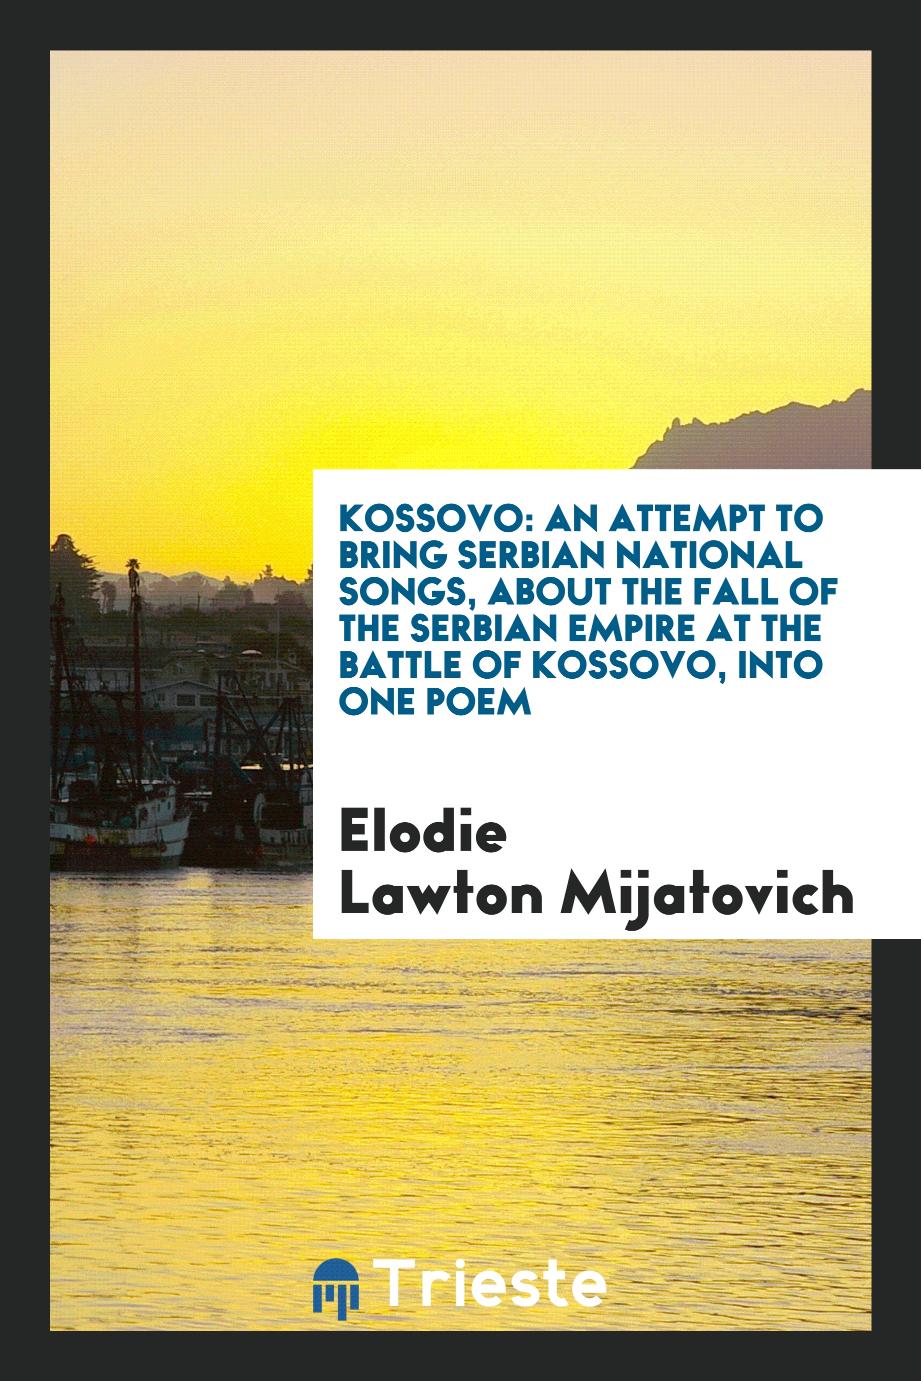 Kossovo: An Attempt to Bring Serbian National Songs, about the Fall of the Serbian Empire at the Battle of Kossovo, into One Poem